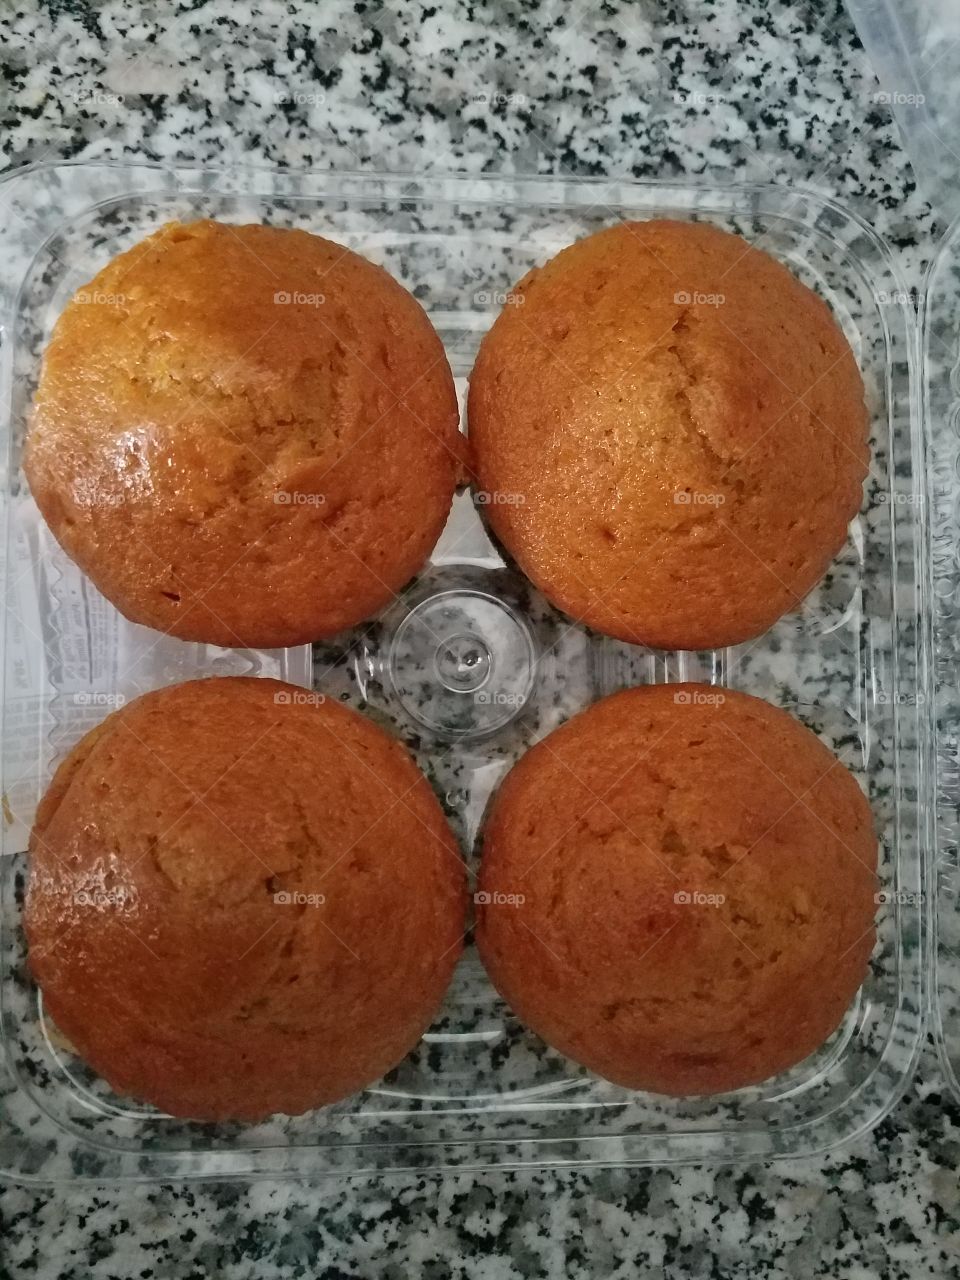 Delicious muffins